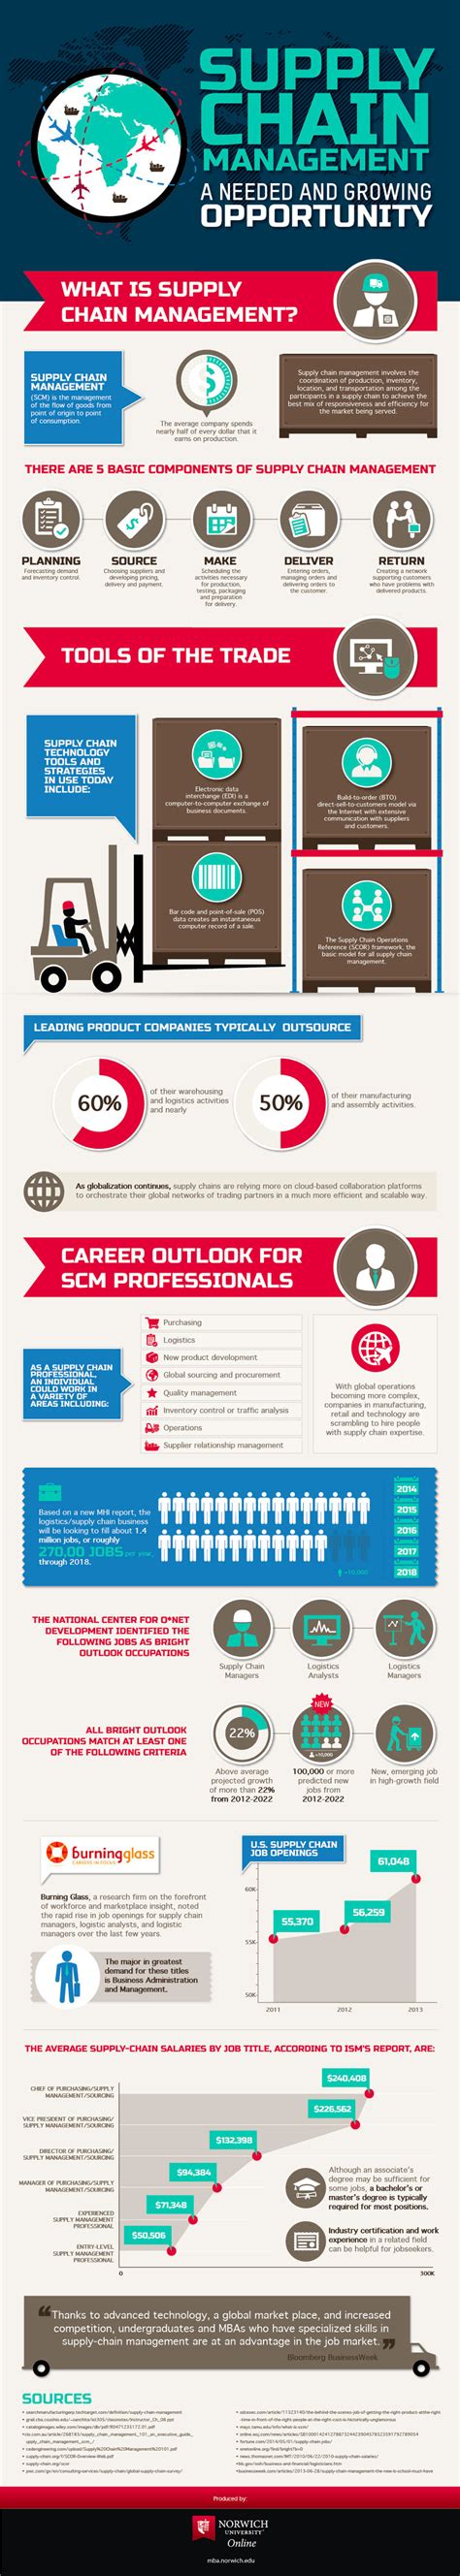 The Rising Demand For Supply Chain Management Professionals Infographic